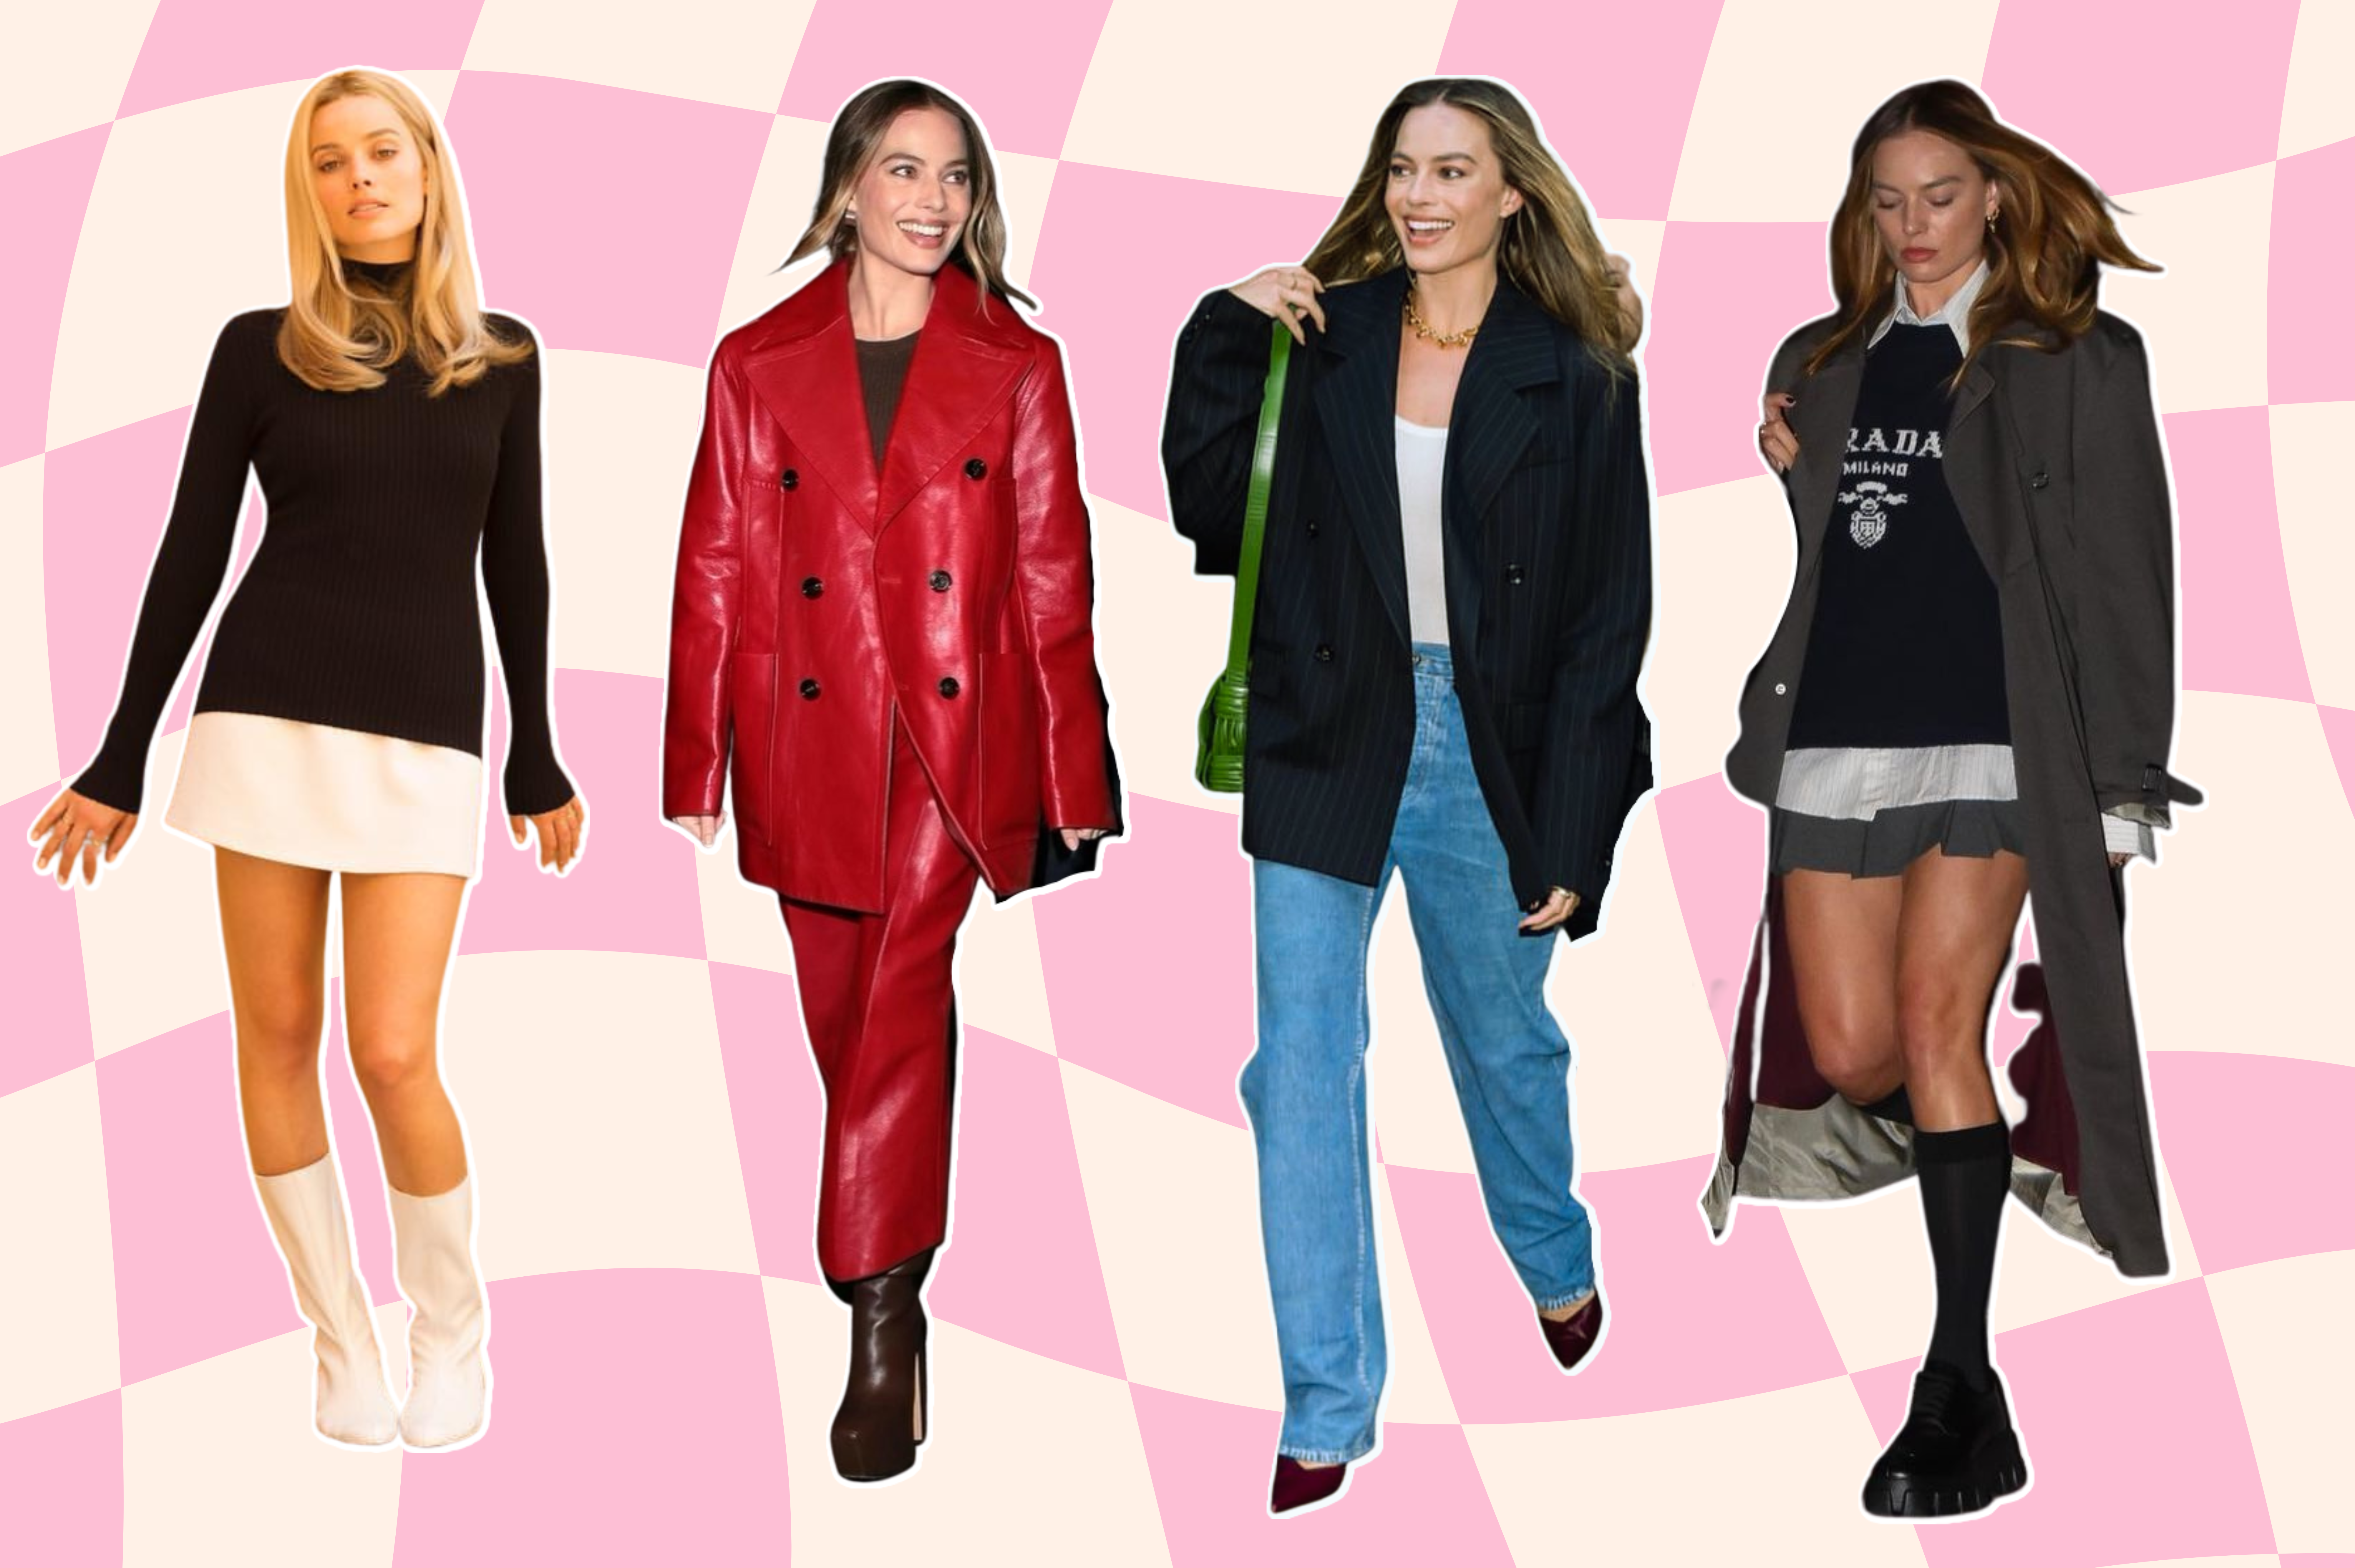 Four cut-outs of Margot Robbie dressed stylishly in four different outfits offset against a zany pale pink and white background.